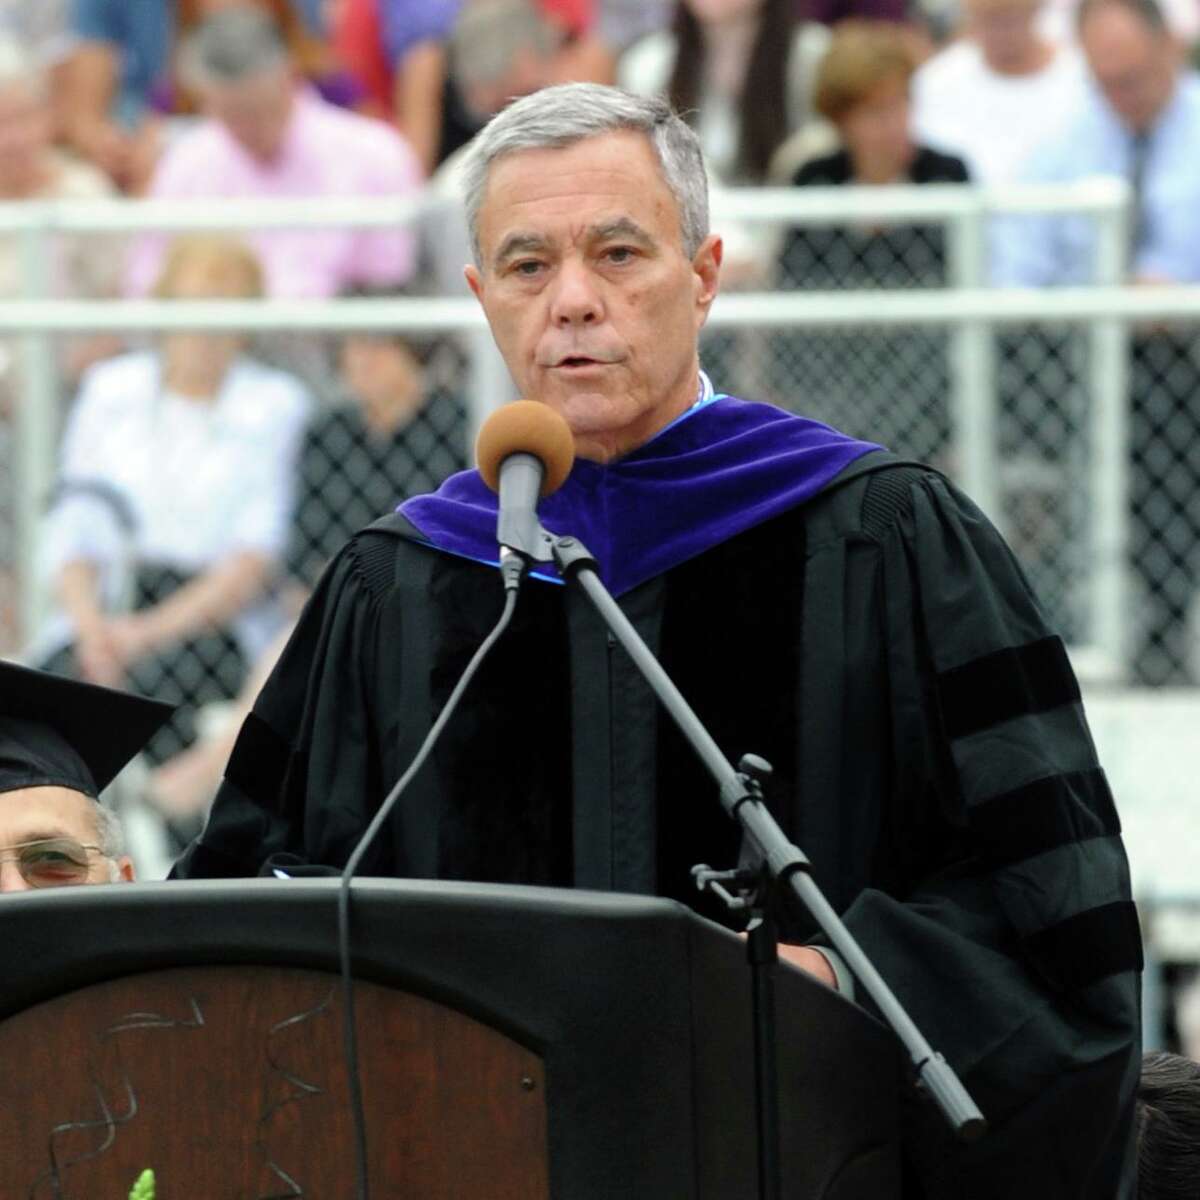 Stephen Wright, then Chairman of the Board of the Education adresses the Trumbull High Class of 2012 at the school’s graduation on June 19, 2012.